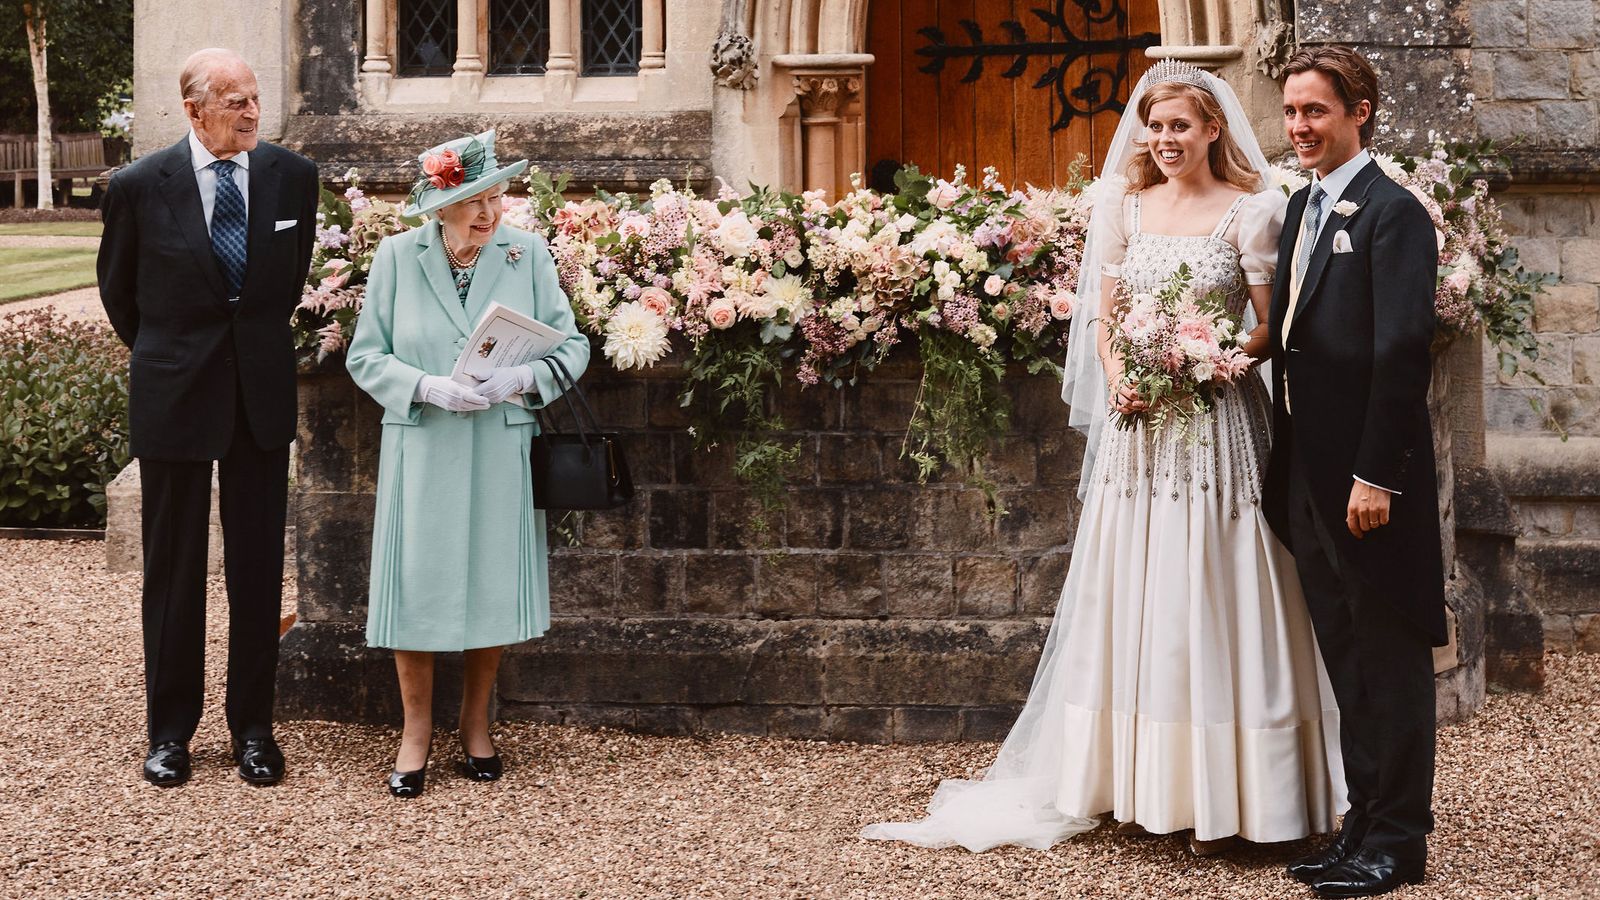 Princess Beatrice Wedding First Photos From Ceremony Show